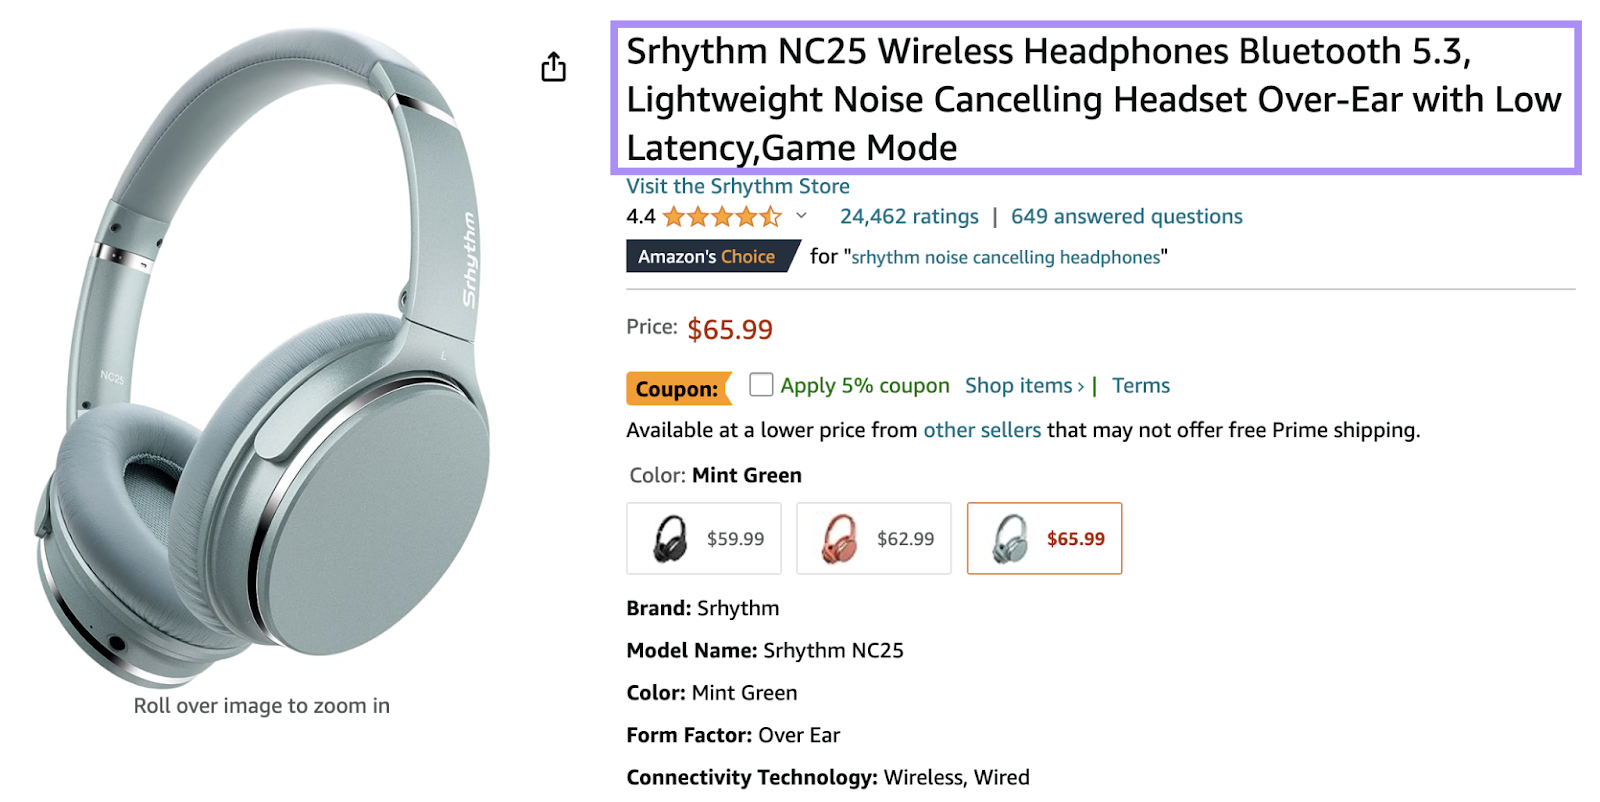 An example of a product title for wireless headphones on Amazon